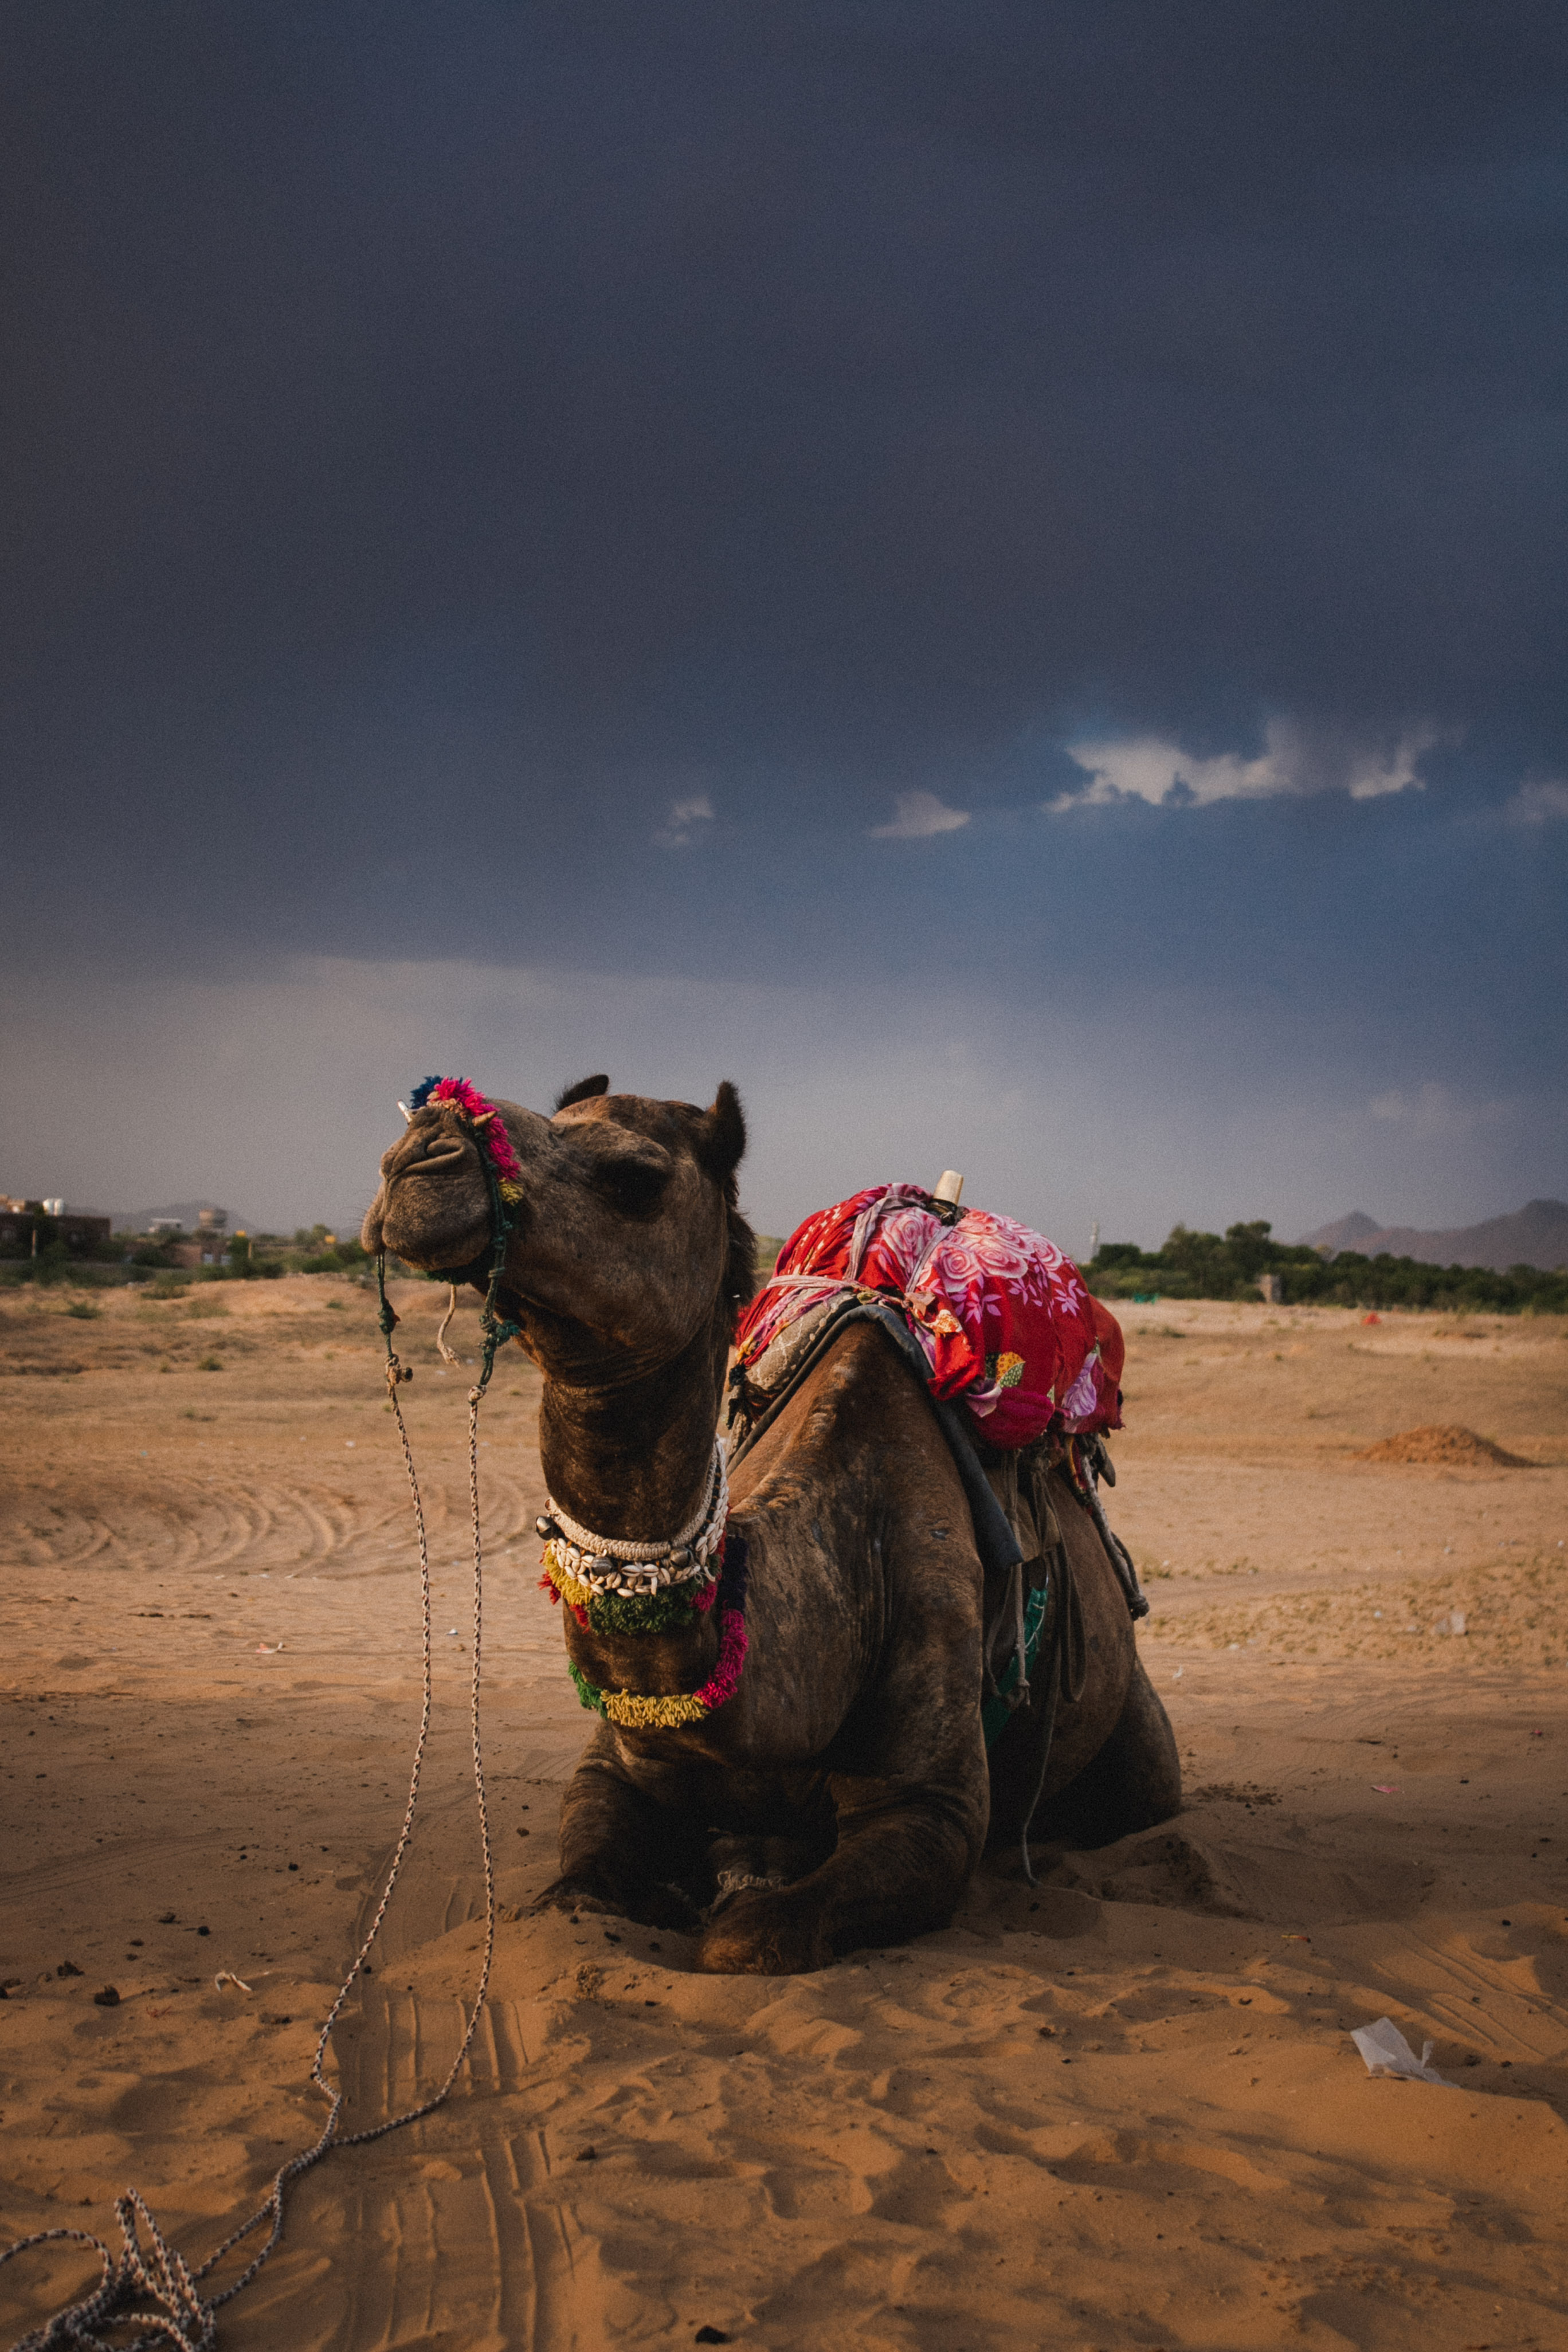 Maybe half an hour into our desert trip we started to notice how the sky began to change, really dark and weird, I felt like in a movie where suddenly all the mood changes into something really dark and mysterious, even the camels started to act uneasy.